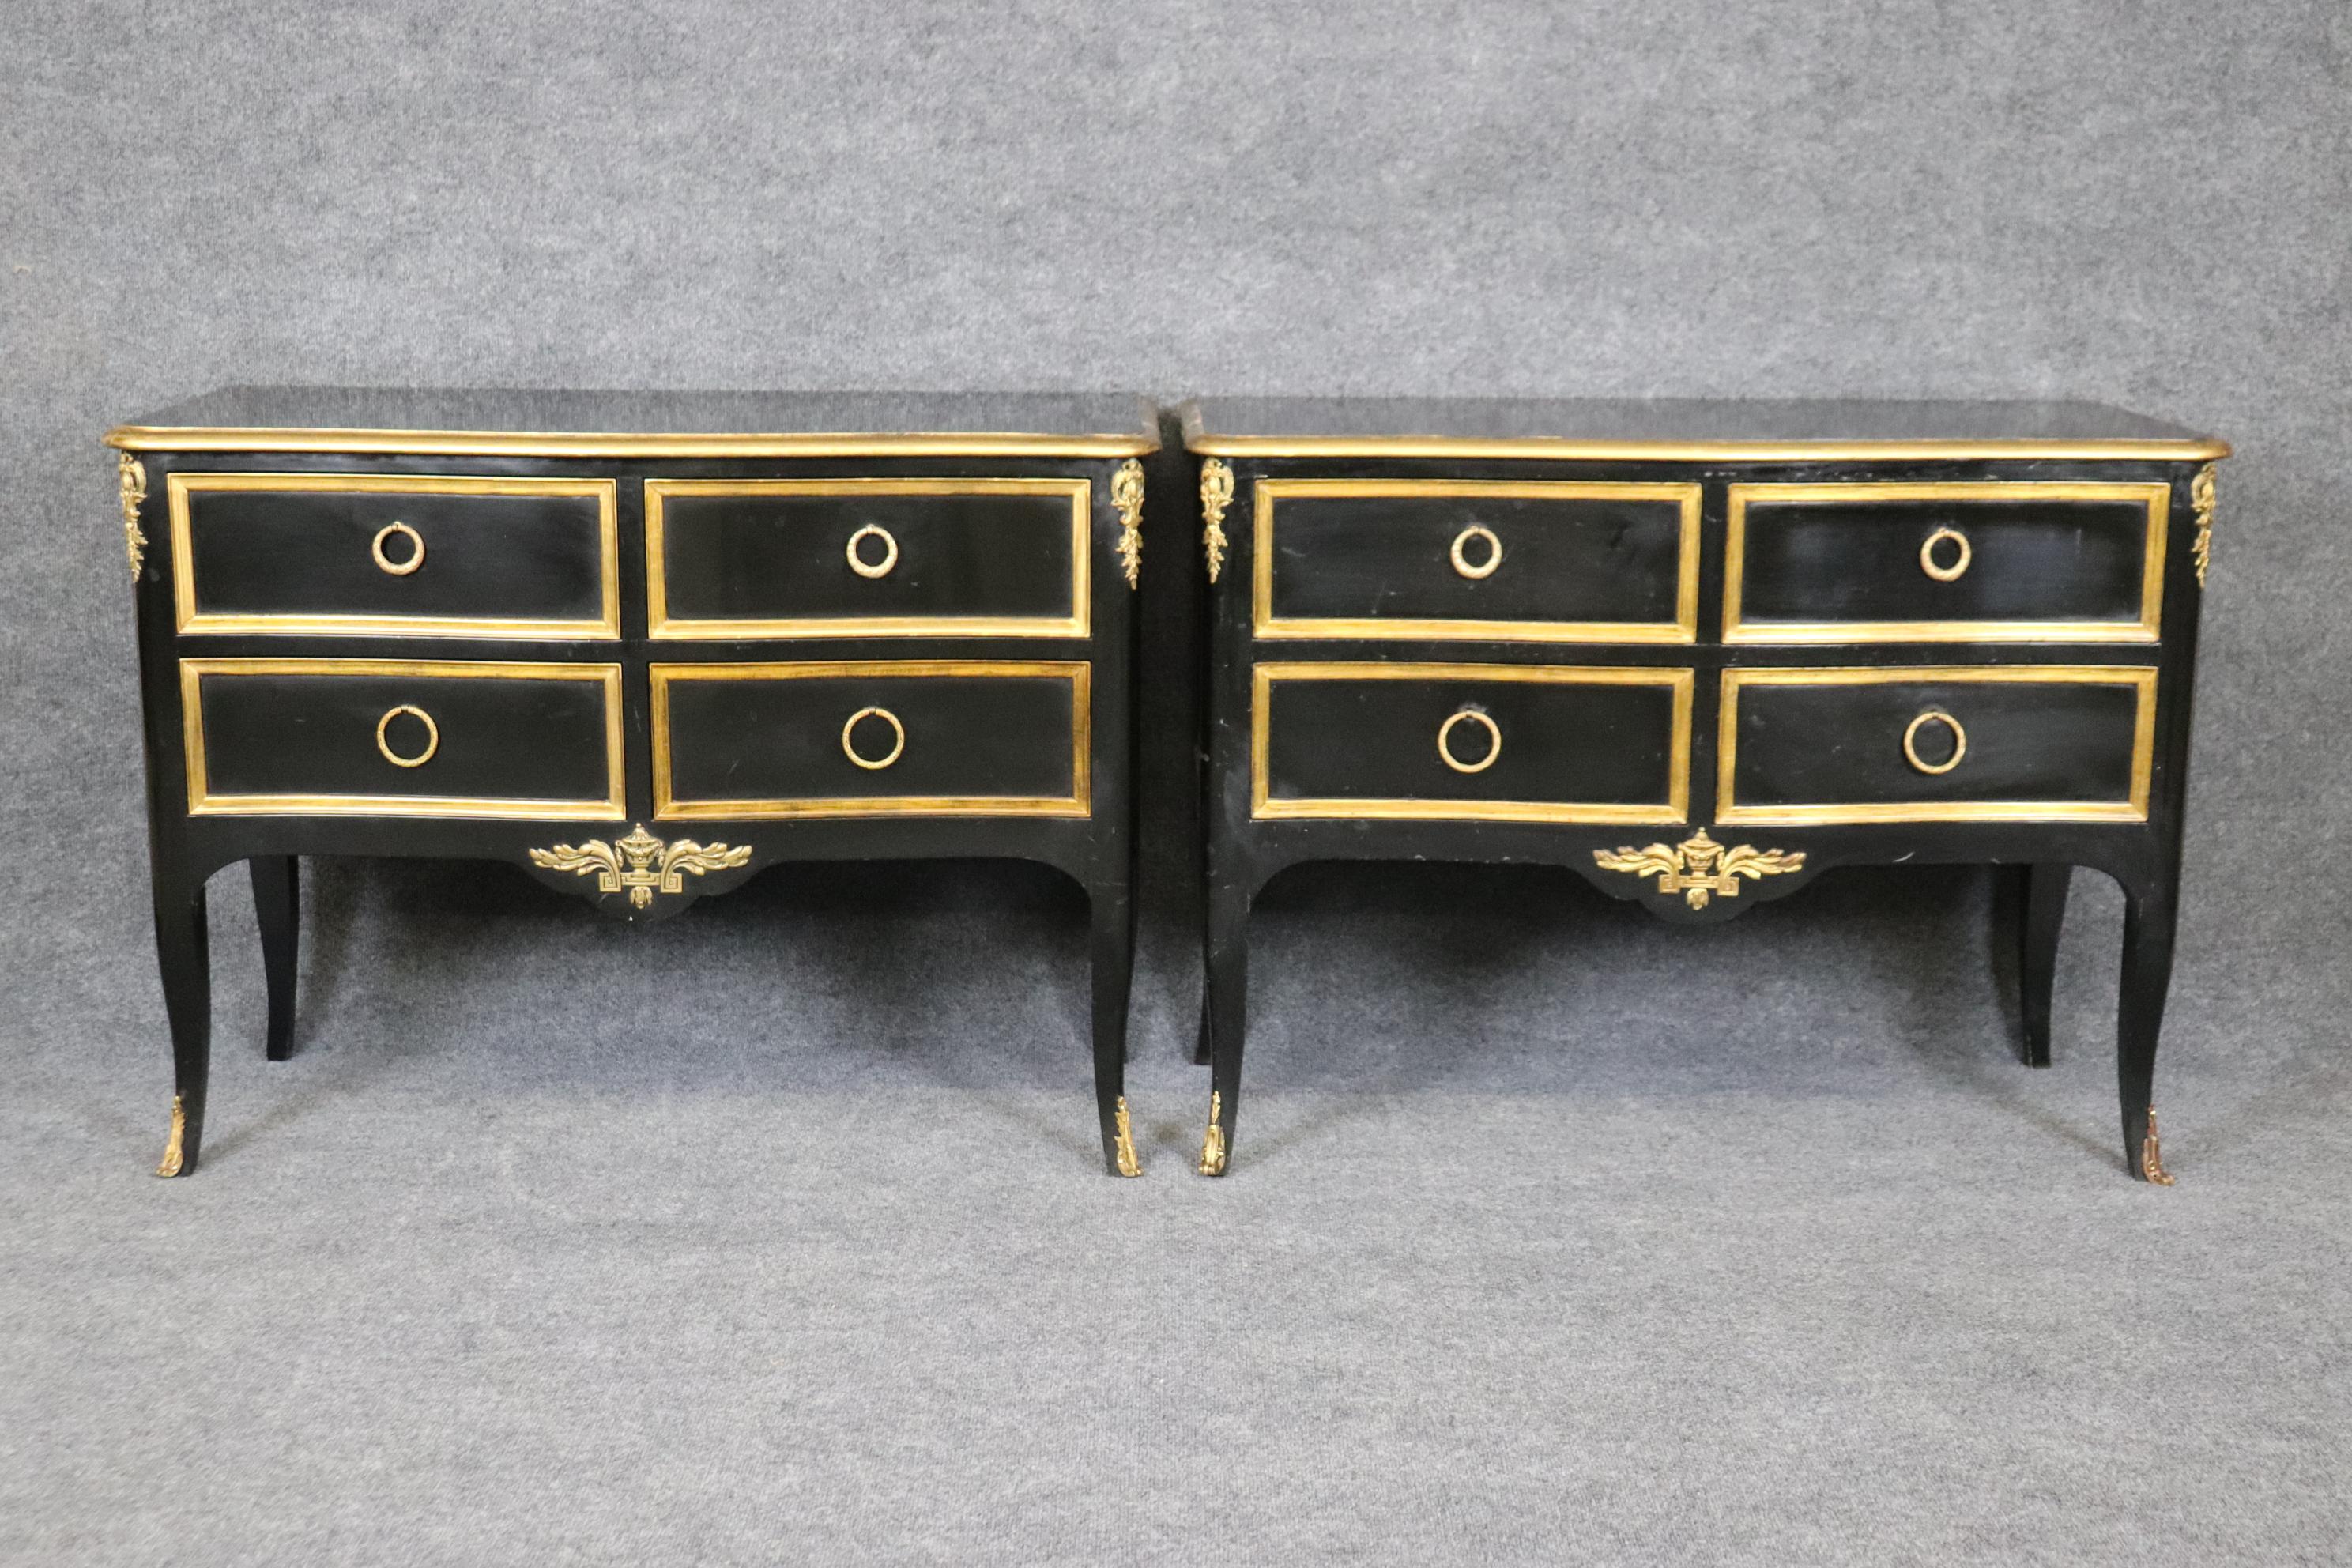 These gorgeous commodes are made of oak and walnut and lacquered in black lacquer and genuine time-worn gold leaf. The commodes were designed in the manner of Maison Jansen of Paris but made in the USA by Jacques Bodart. He made many fine French